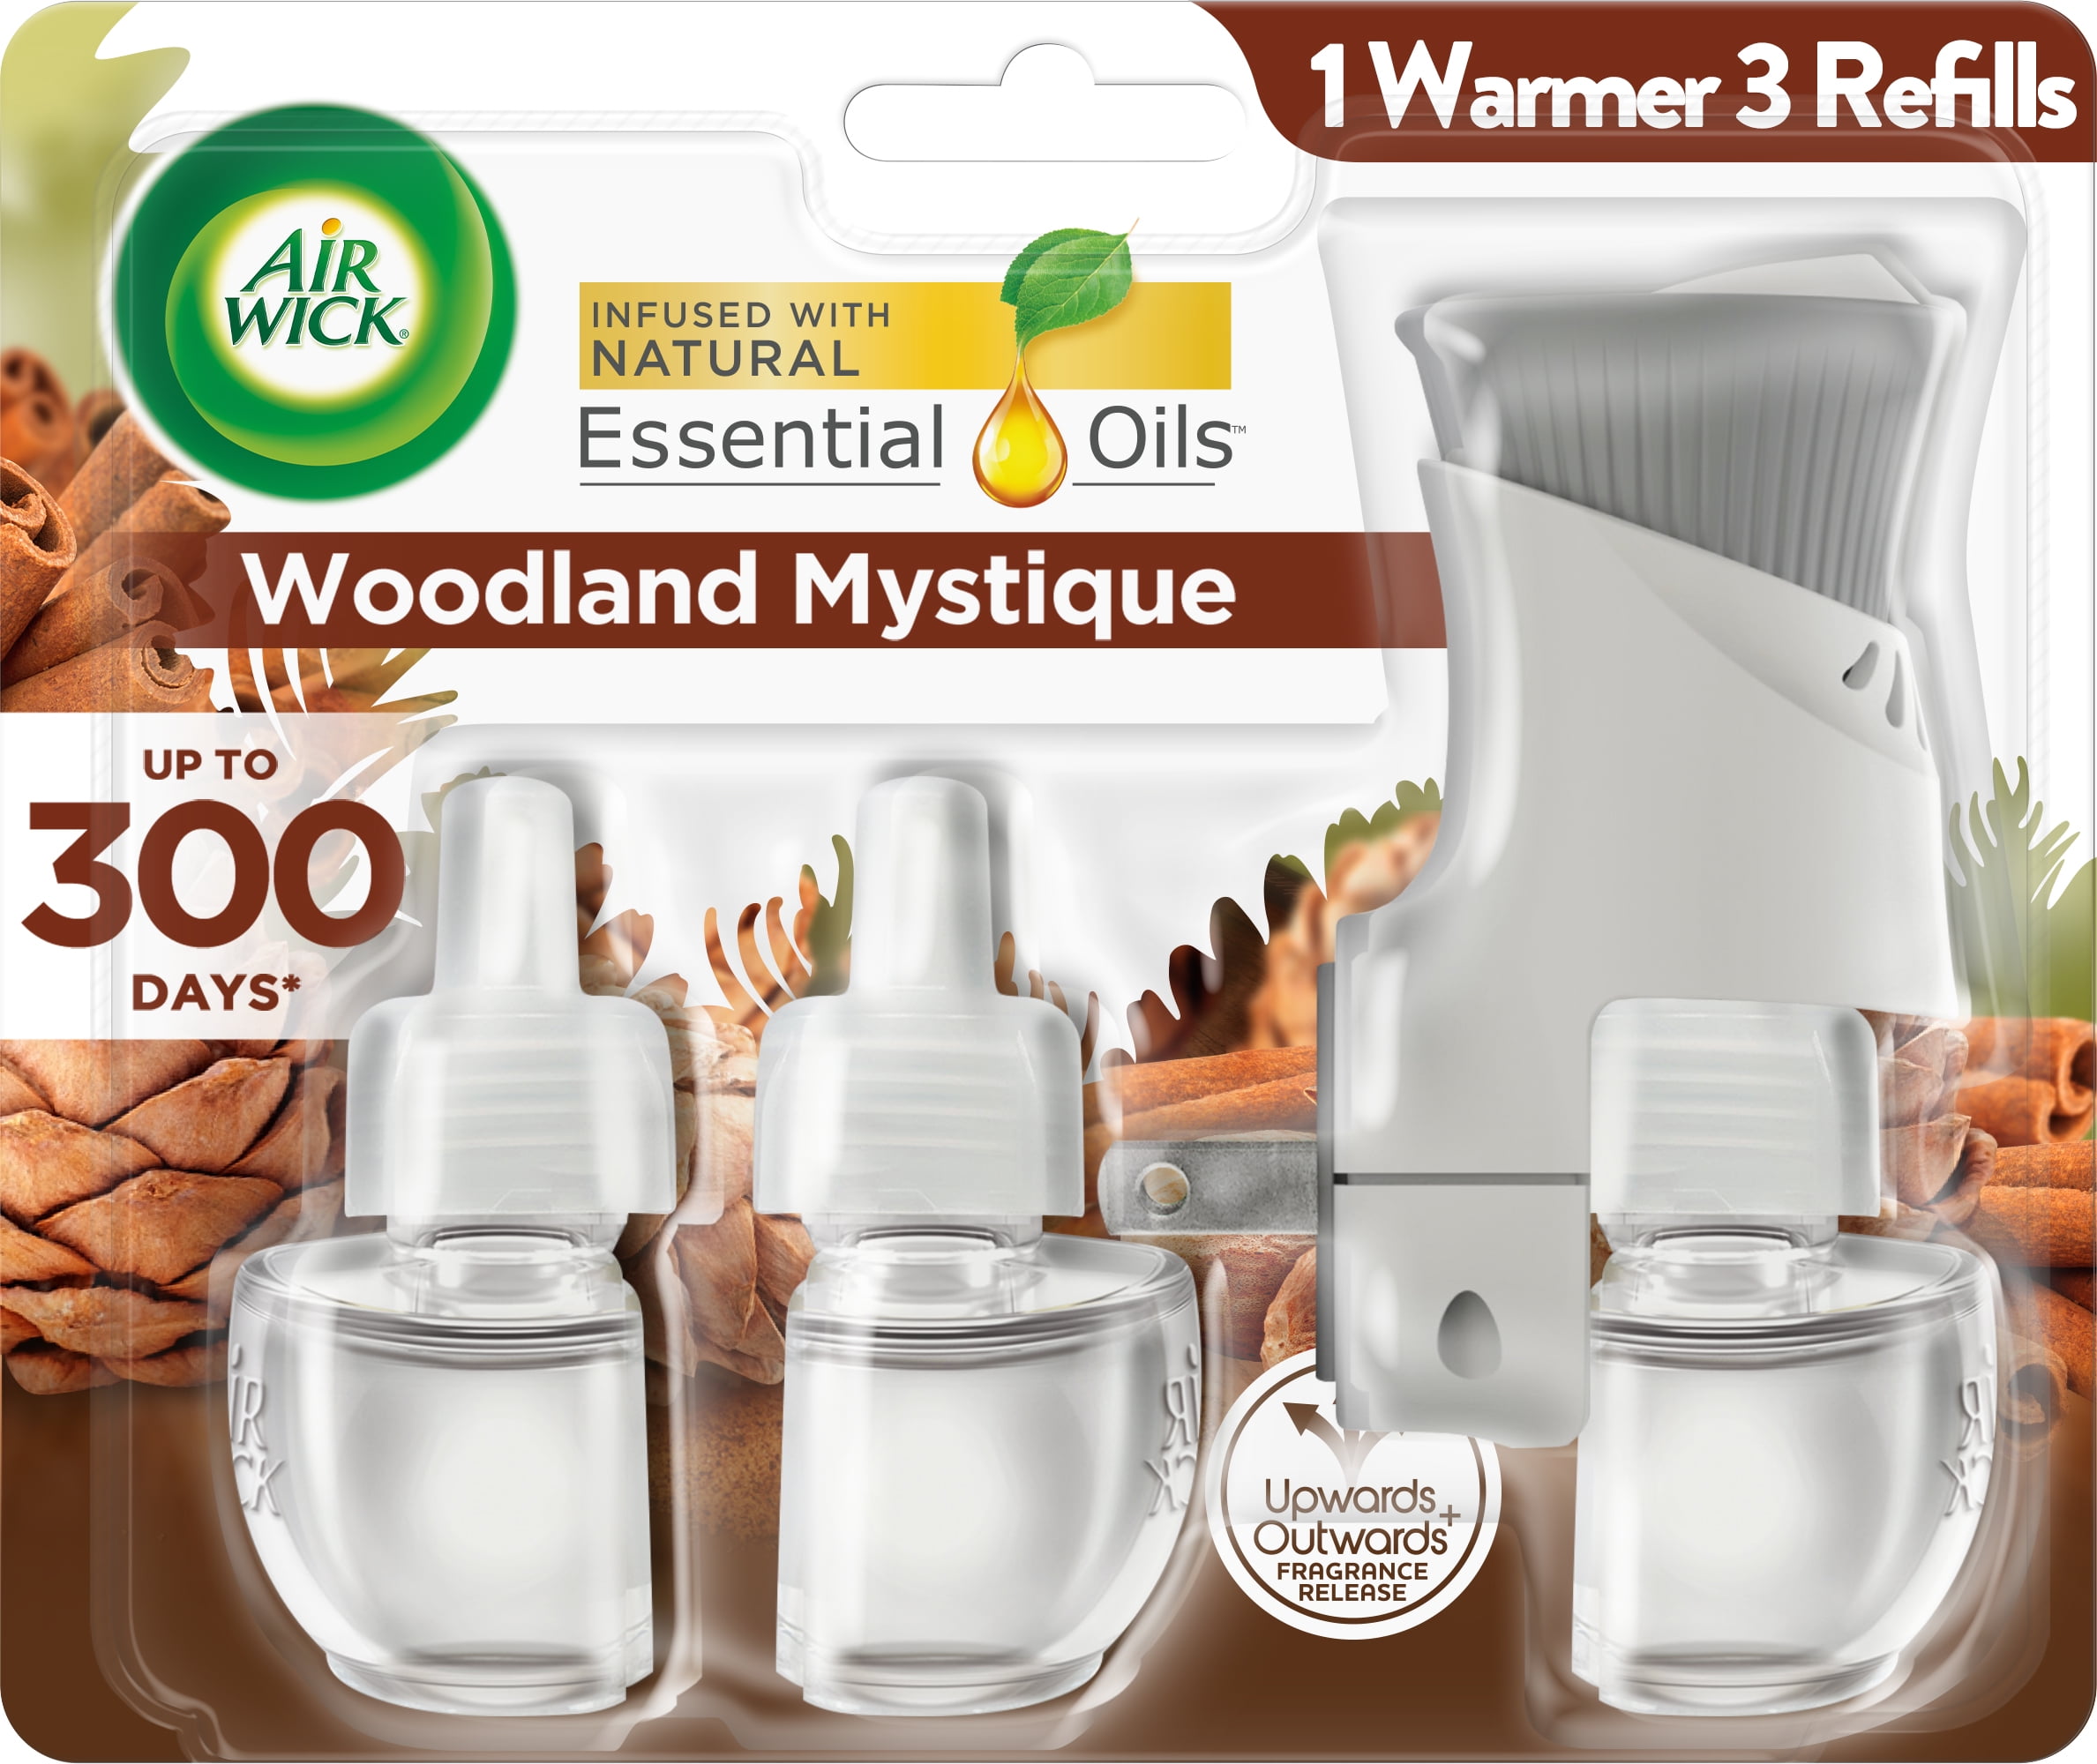 Air Wick Plug in Scented Oil Starter Kit (Warmer + 3 Refills), Woodland